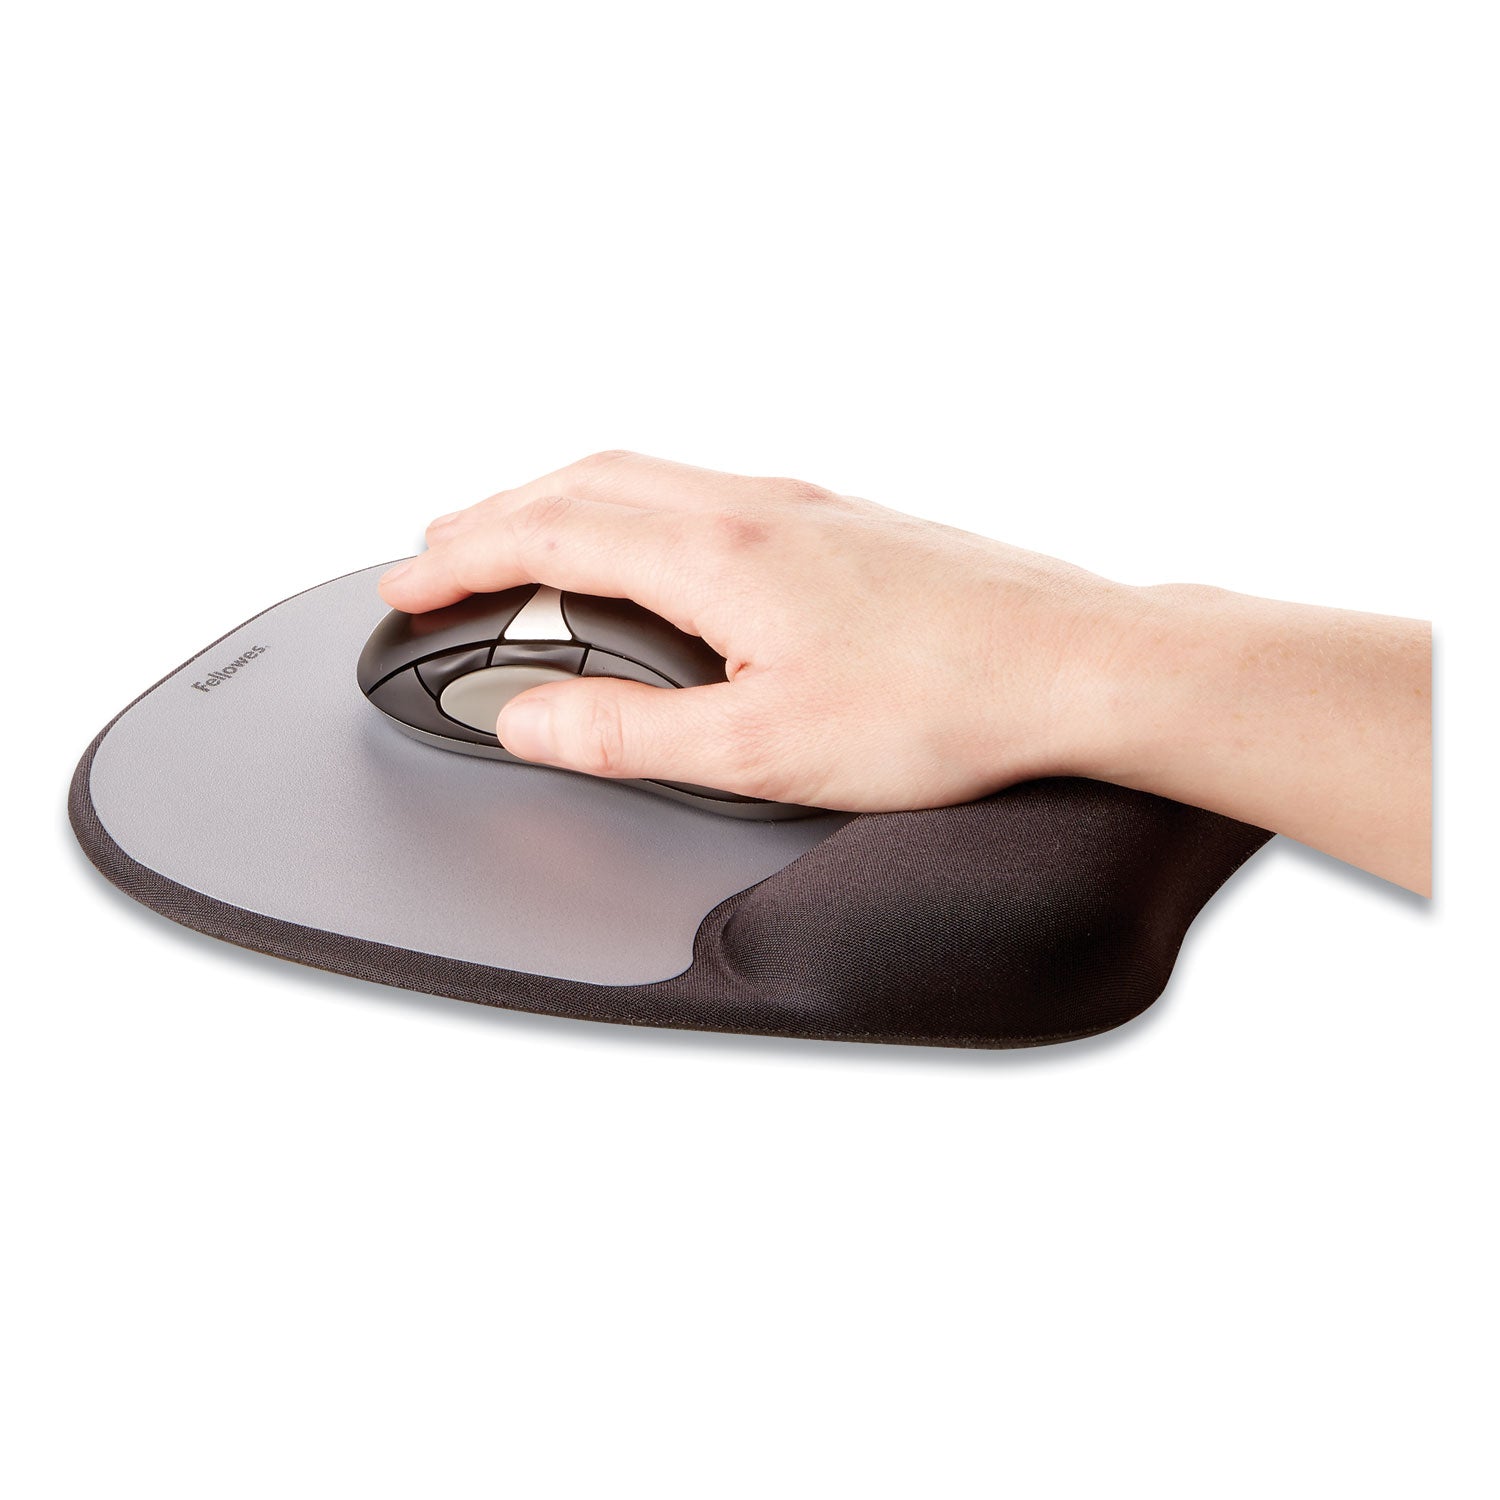 Memory Foam Mouse Pad with Wrist Rest, 7.93 x 9.25, Black/Silver - 